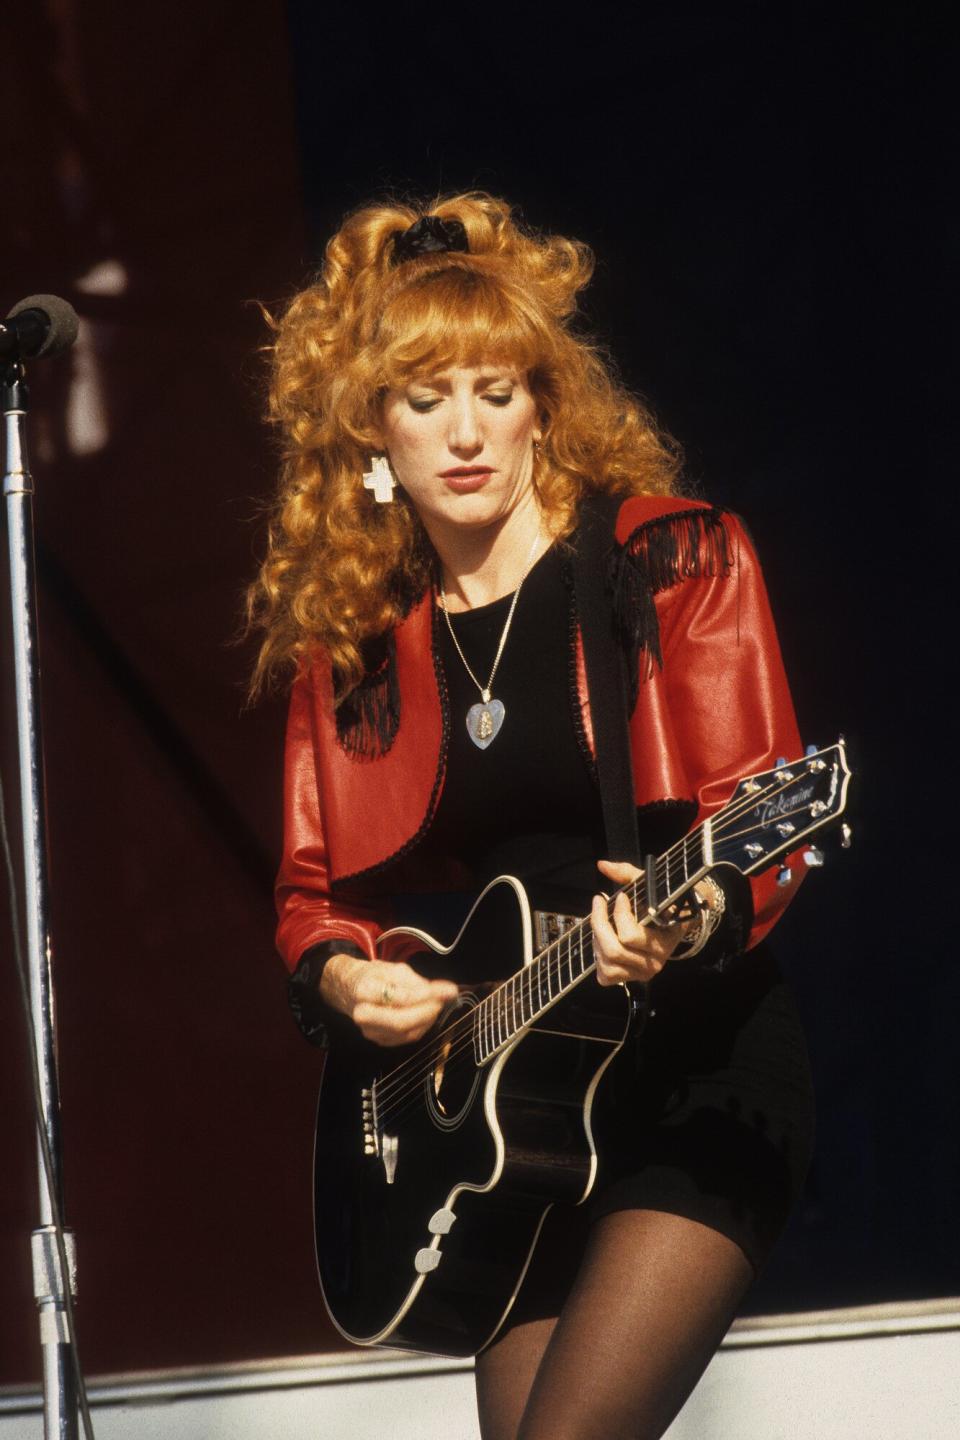 Patti Scialfa performs on stage with Bruce Springsteen and the E Street Band on the Tunnel of Love Tour, Feyenoord Stadium, De Kuip, Rotterdam, Netherlands, 28th June 1988.